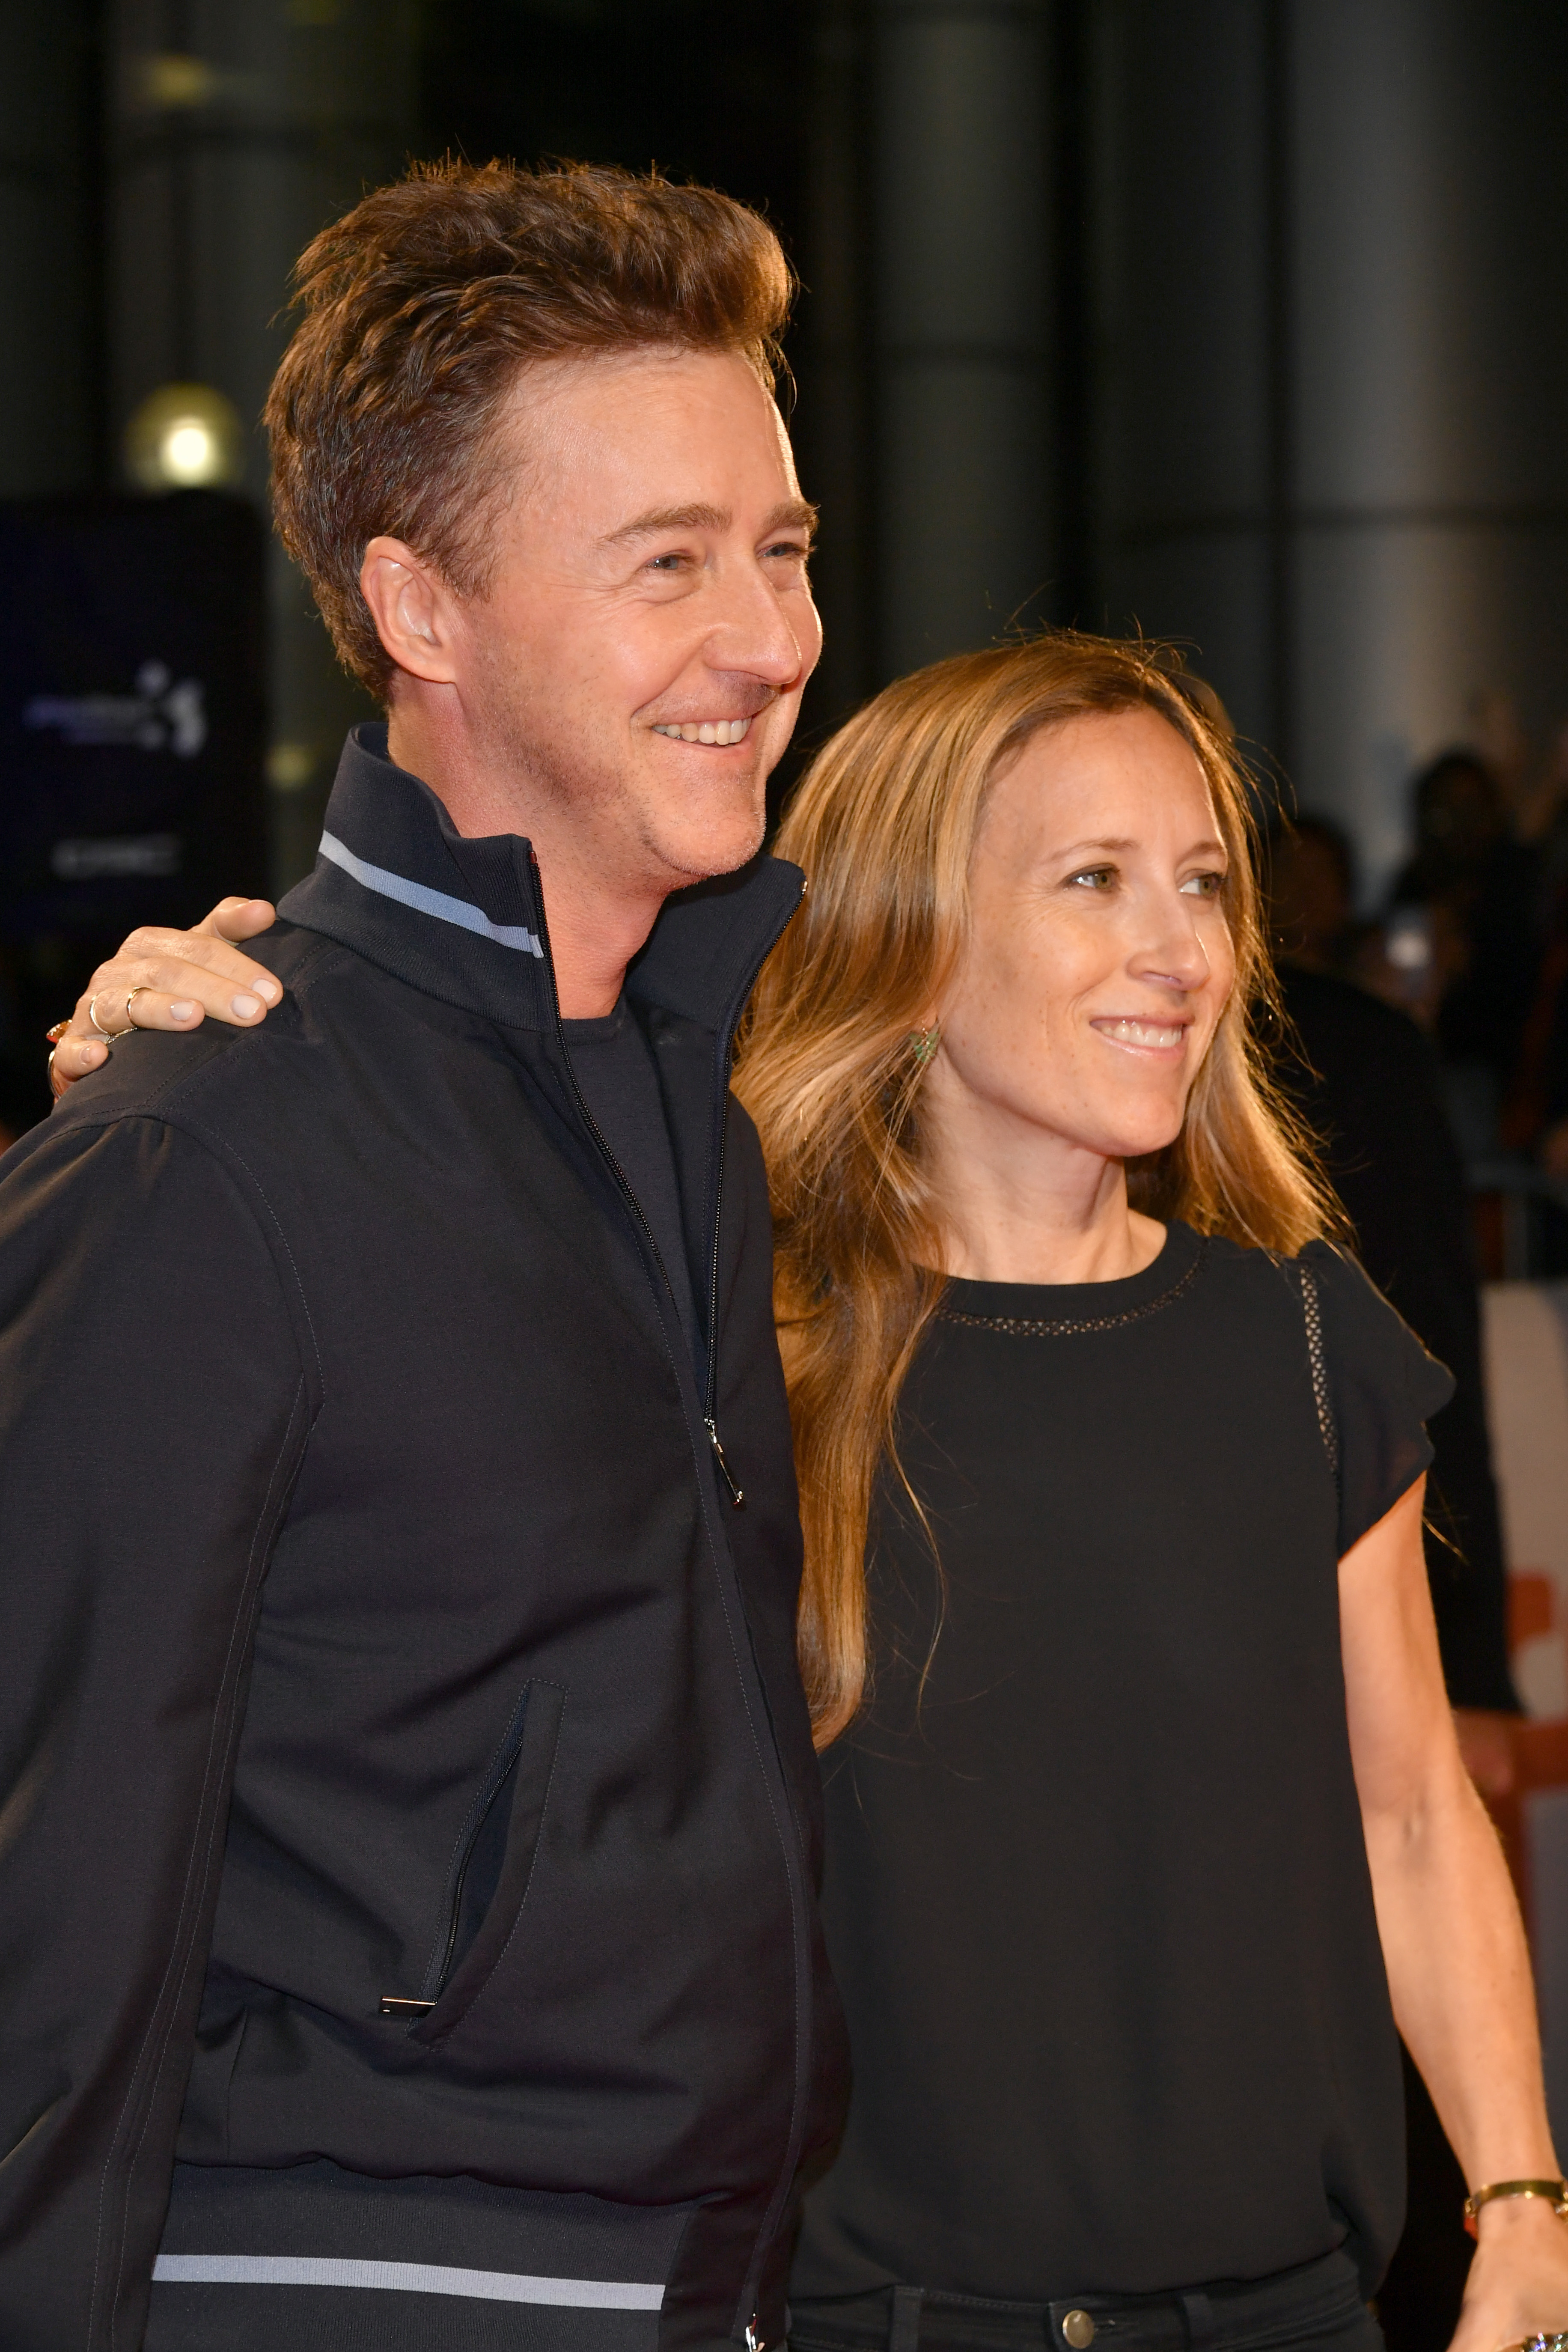 Edward Norton and Shauna Robertson at the premiere of "Joker" held at the Roy Thomson Hall in Toronto, Canada, on September 09, 2019. | Source: Getty Images